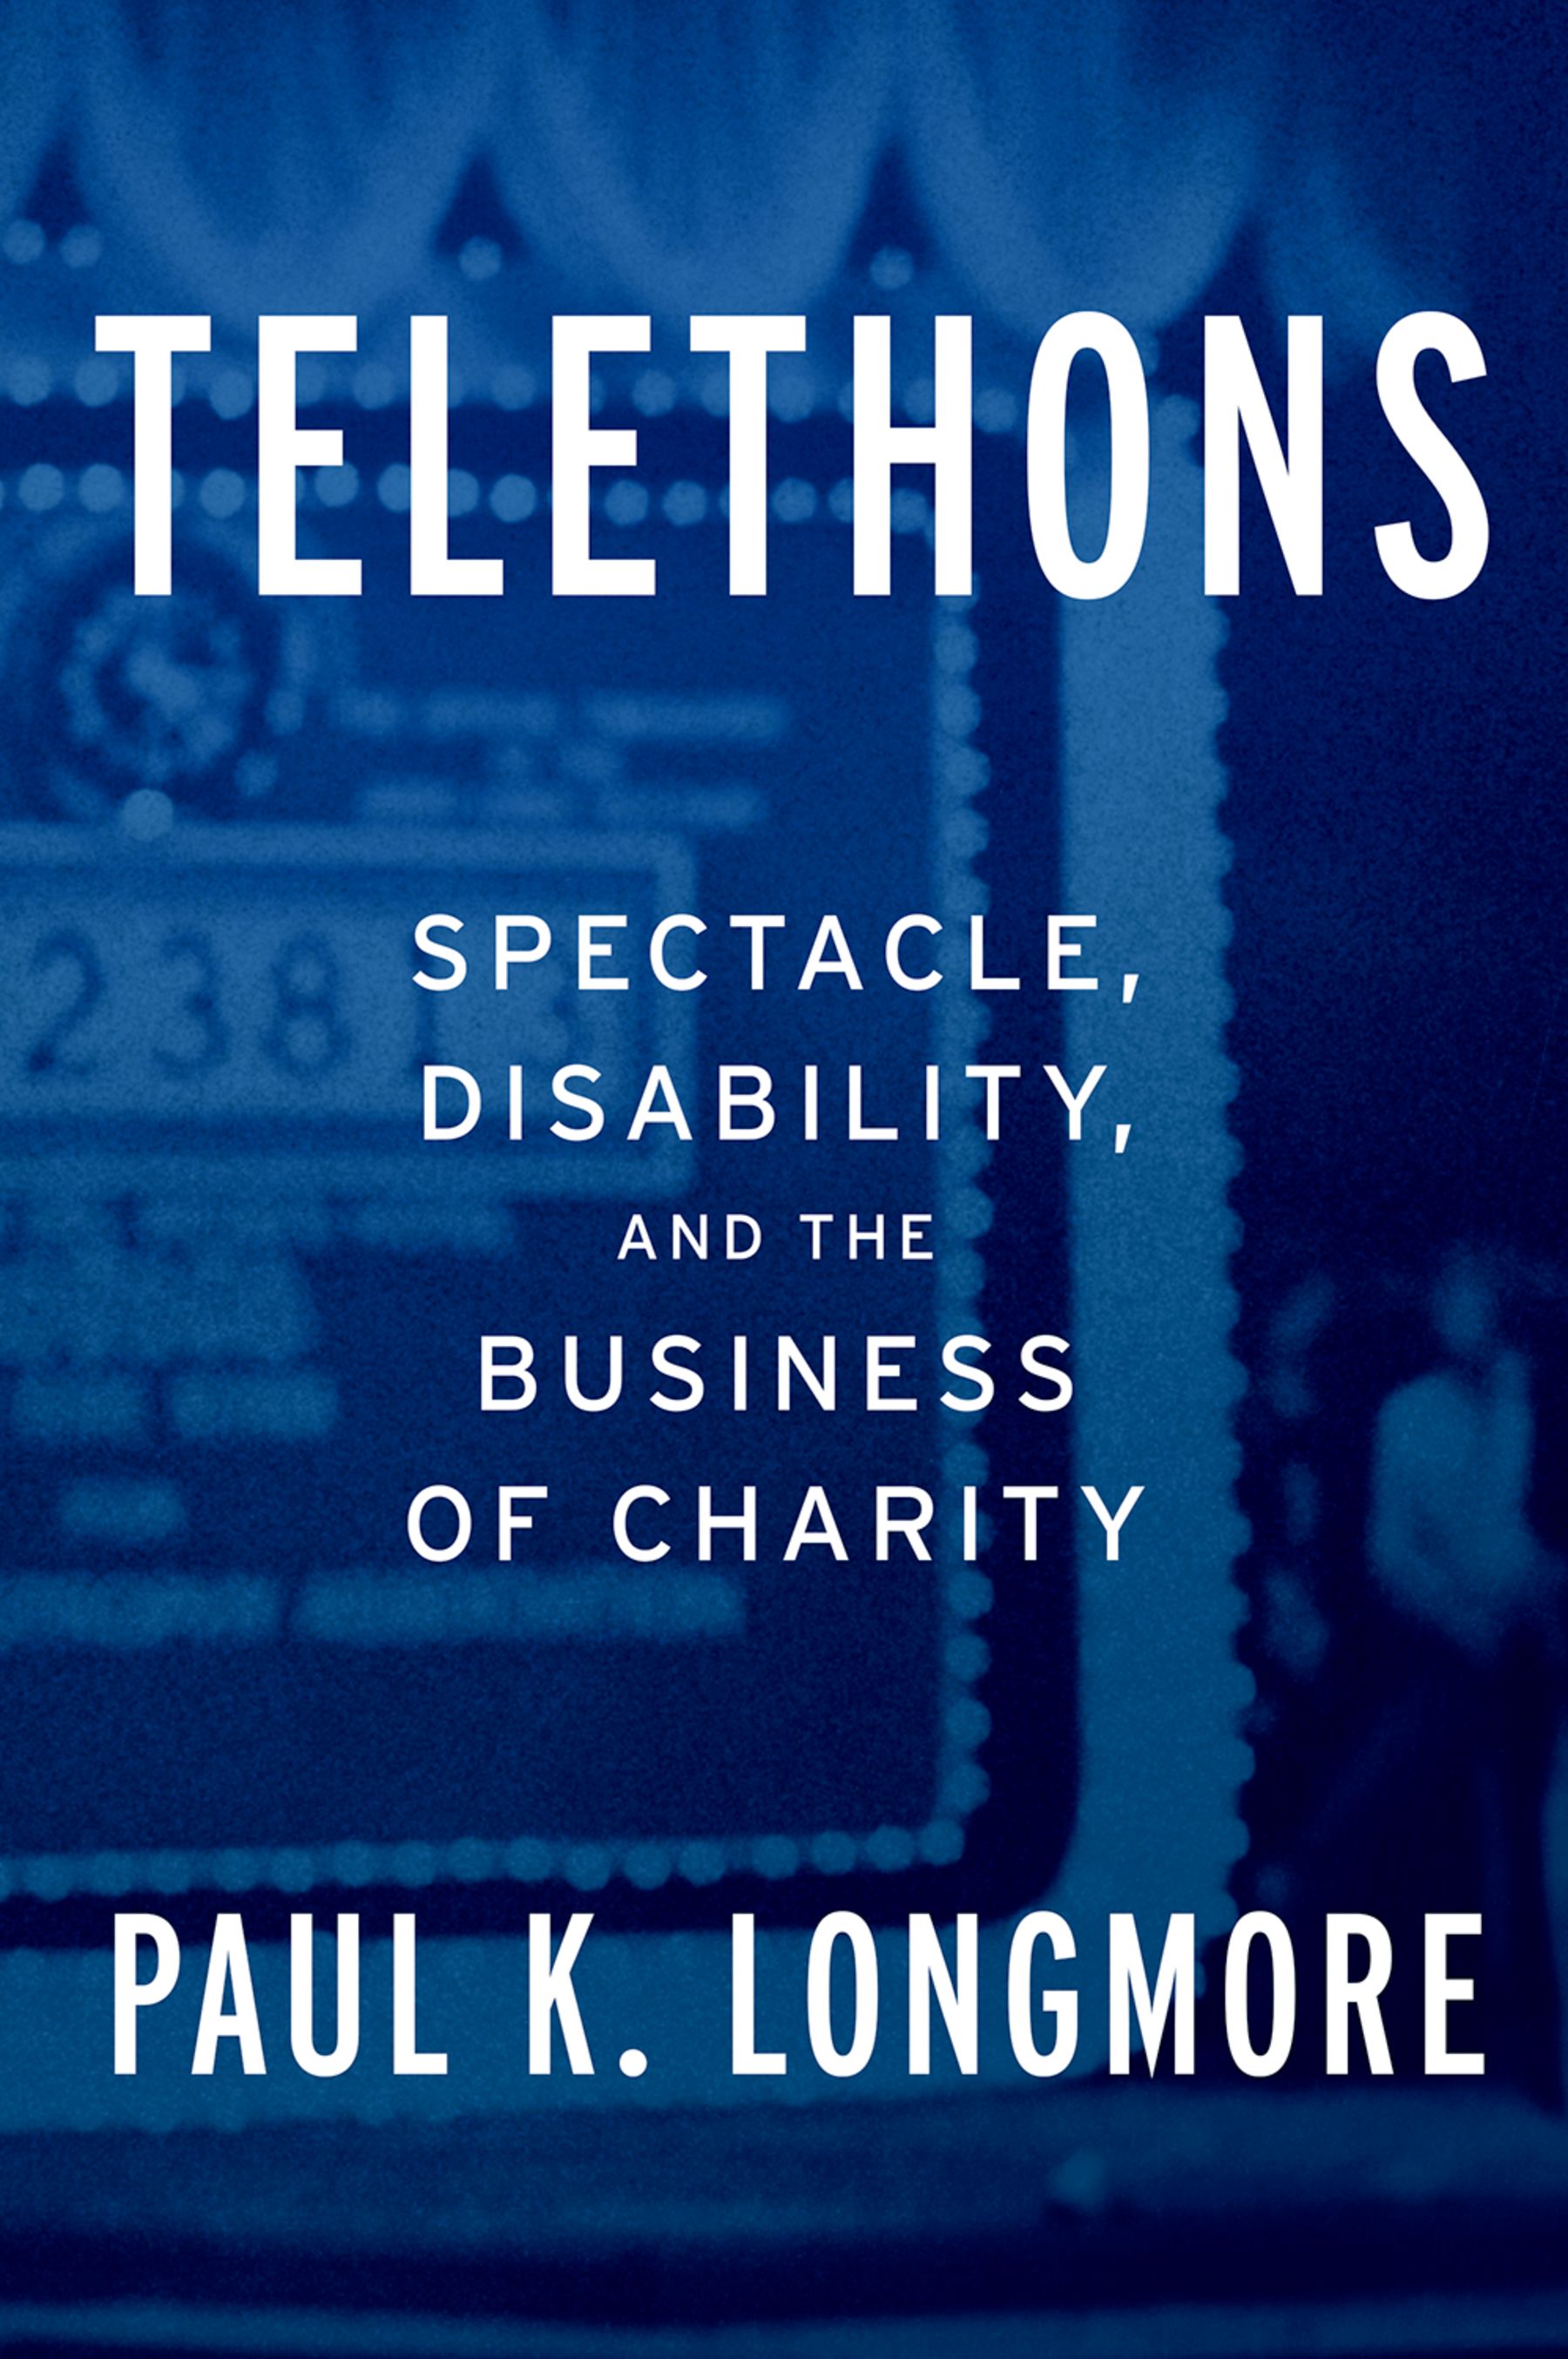 Book cover: Telethons: Spectacle, Disability, and the Business of Charity by Paul K. Longmore